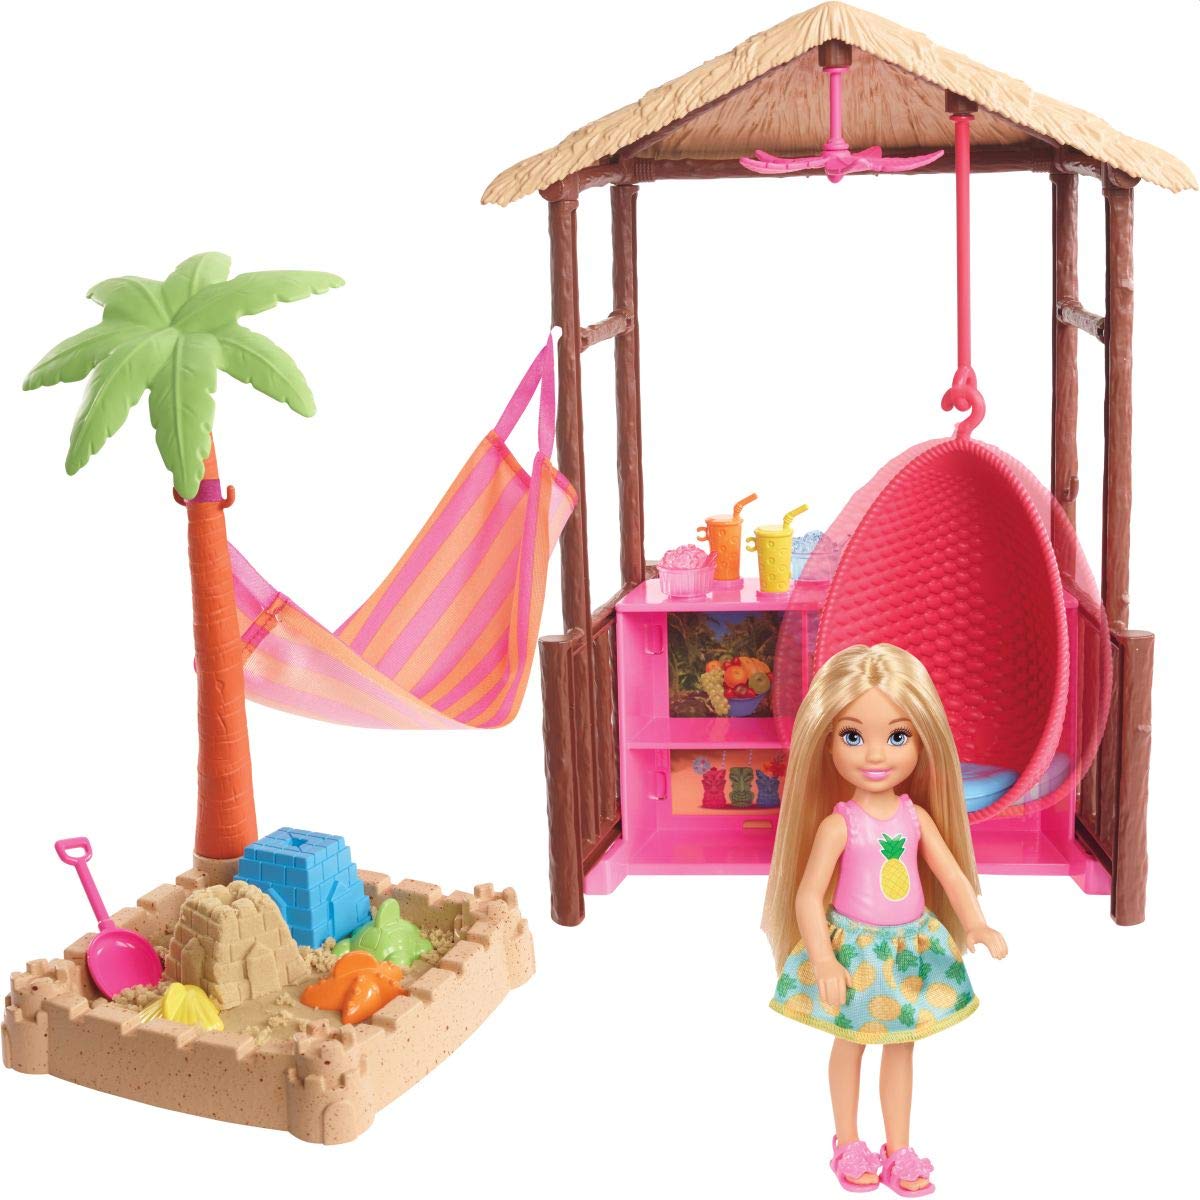 Barbie Chelsea Doll and Tiki Hut Playset with 6-inch Blonde Doll, Hut with Swing, Hammock, Moldable Sand, 4 Molds and 4 Storytelling Pieces, Gift for 3 to 7 Year Olds [Amazon Exclusive]